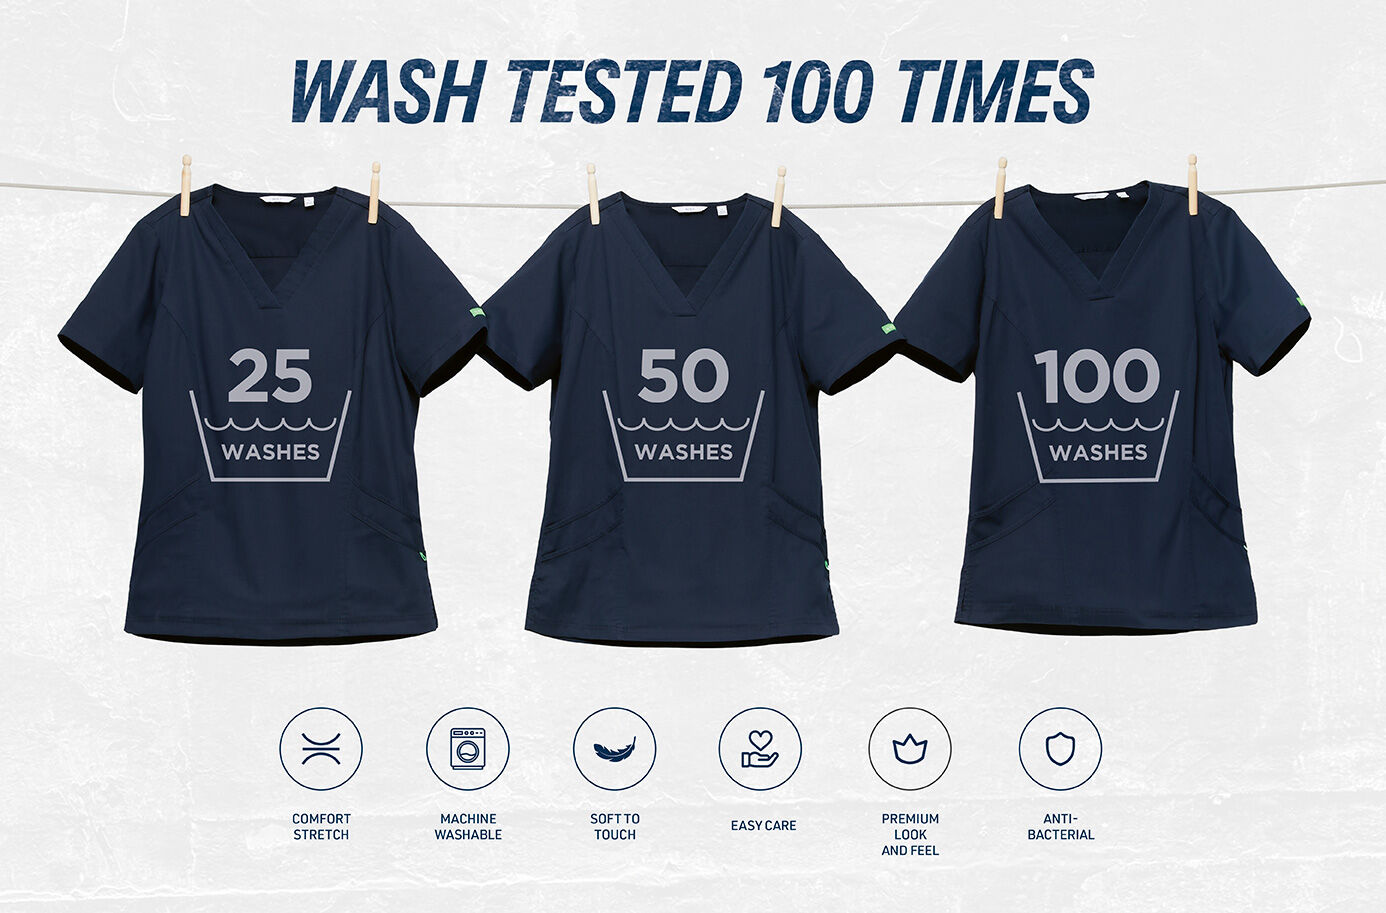 Wash tested 100 times